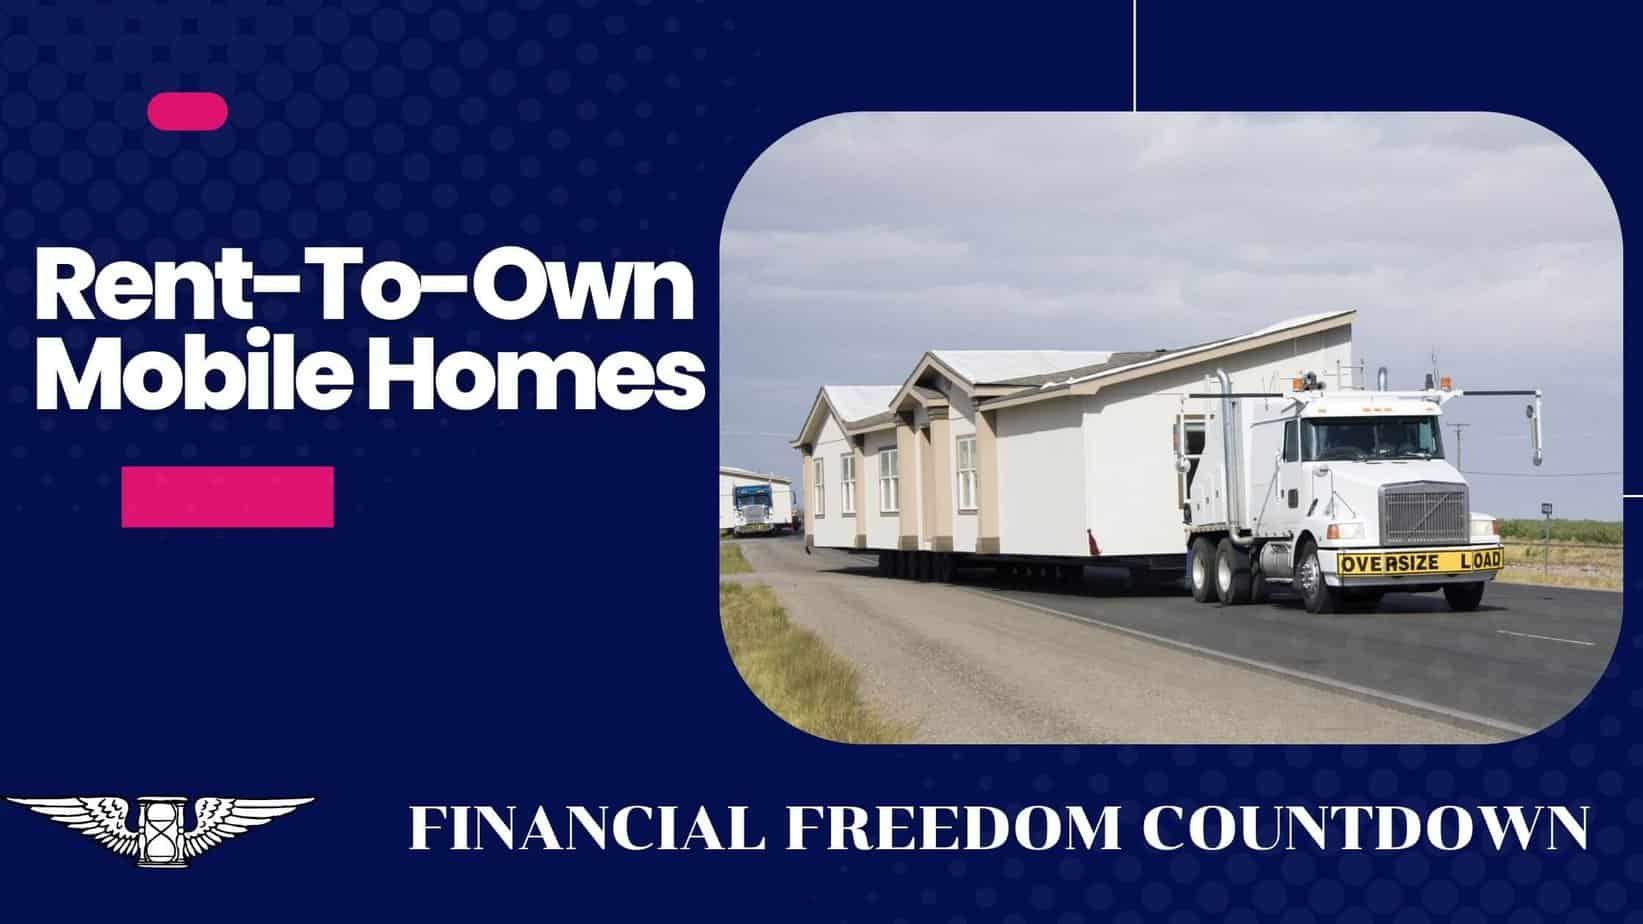 Rent-To-Own Mobile Homes